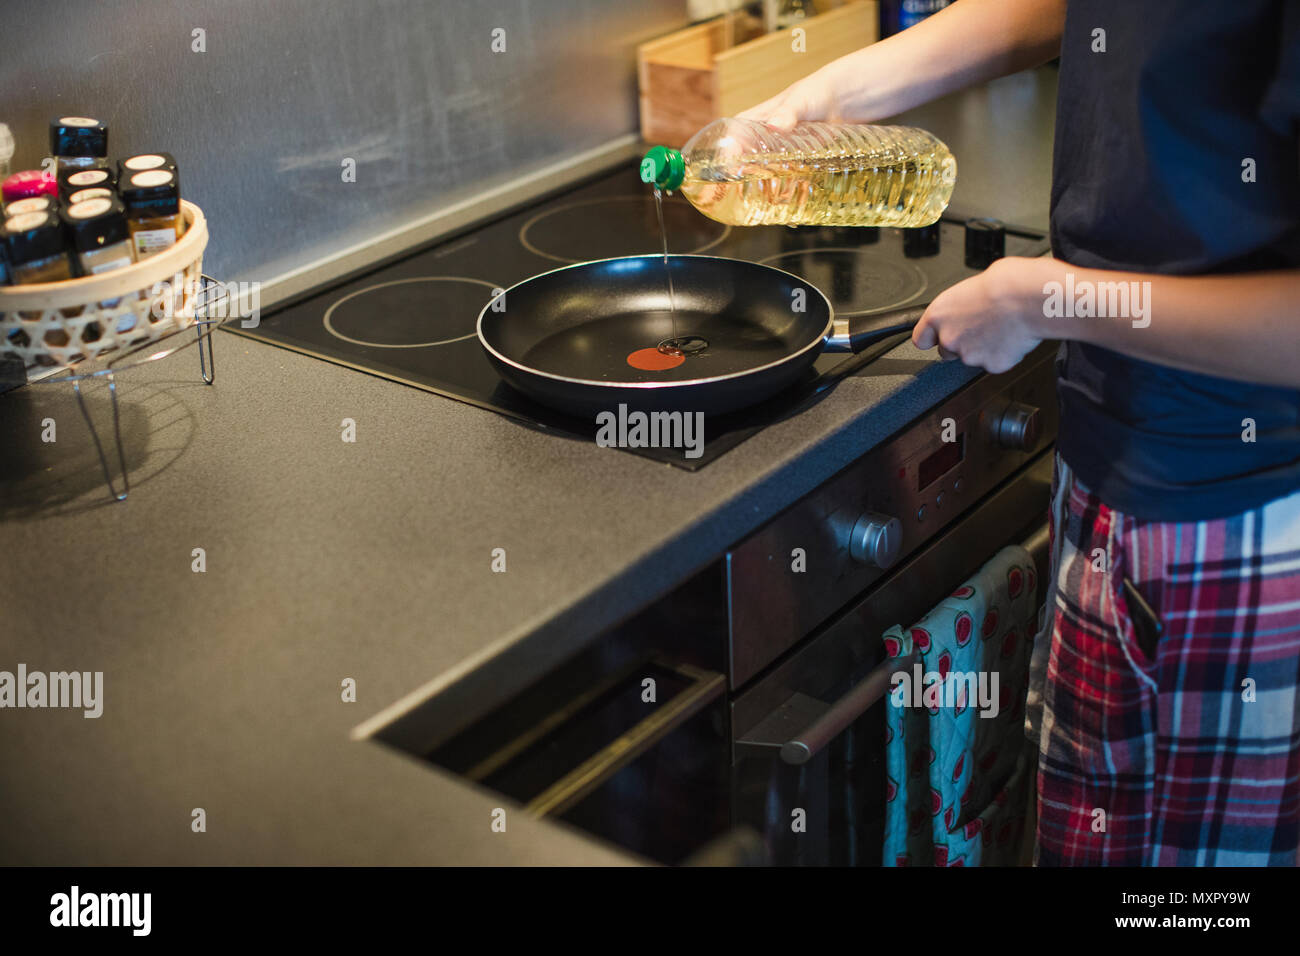 Unrecognisable person pouring oil into a frying pan to make some breakfast. Stock Photo